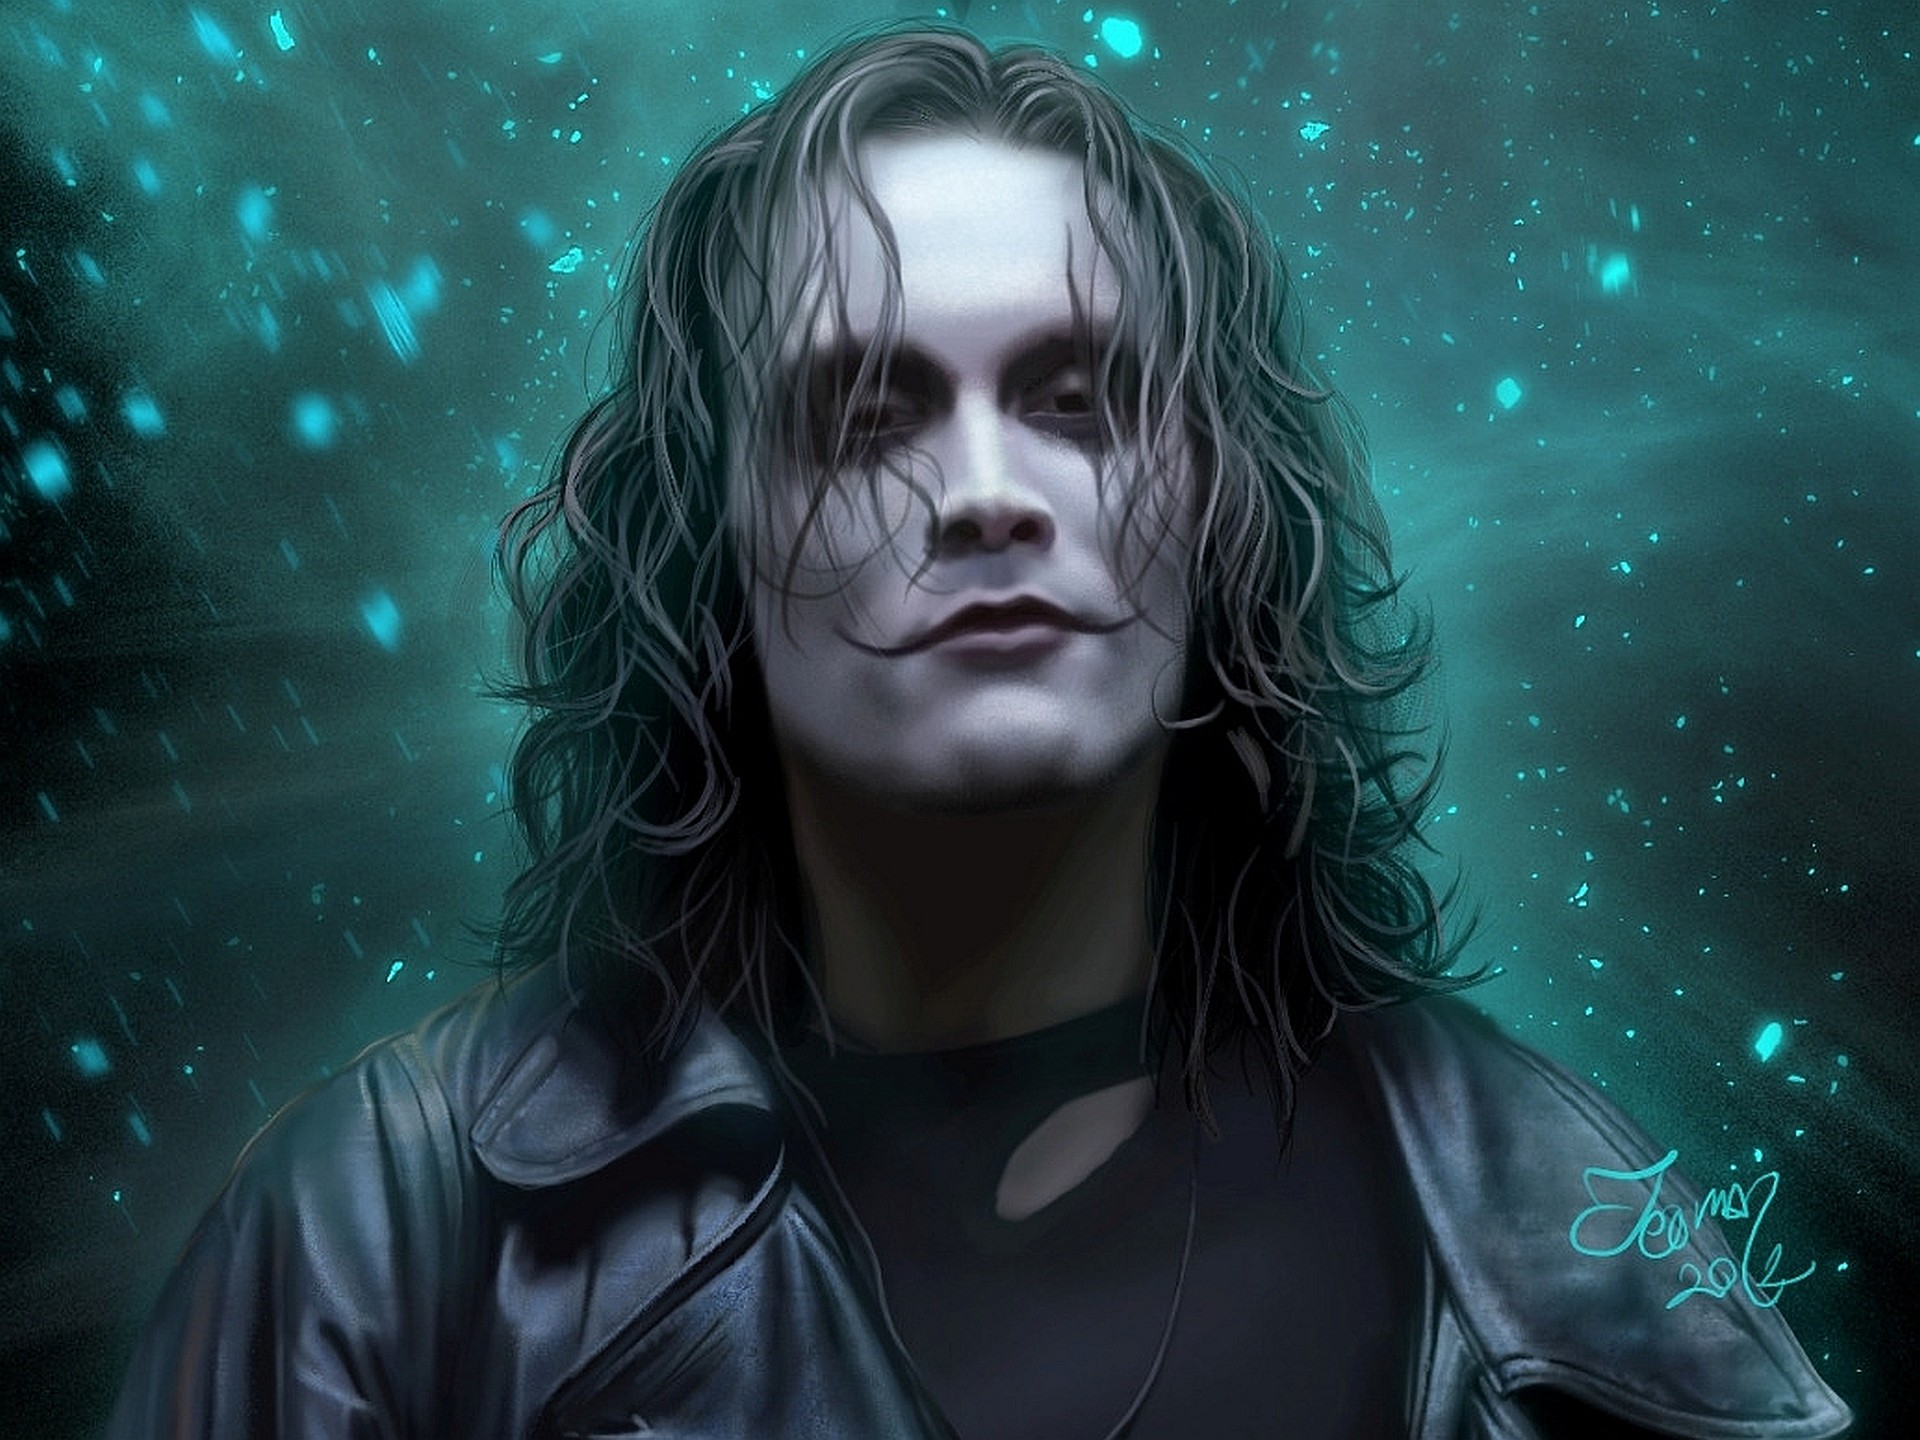 1920x1440 1000+ images about the crow on Pinterest | Instrumental, Pictures and Search